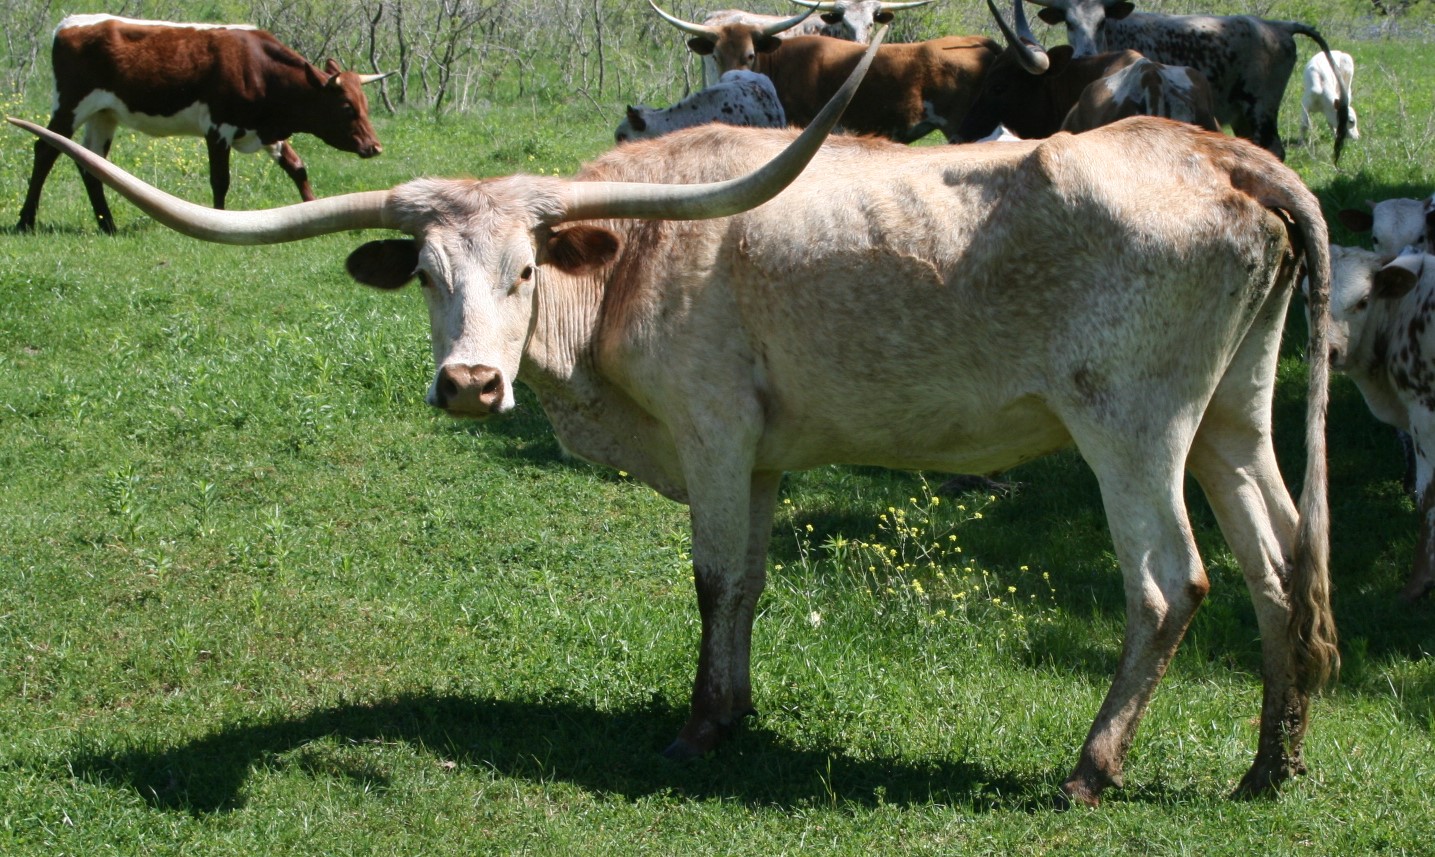 A picture containing grass, cow, outdoor, field

Description automatically generated